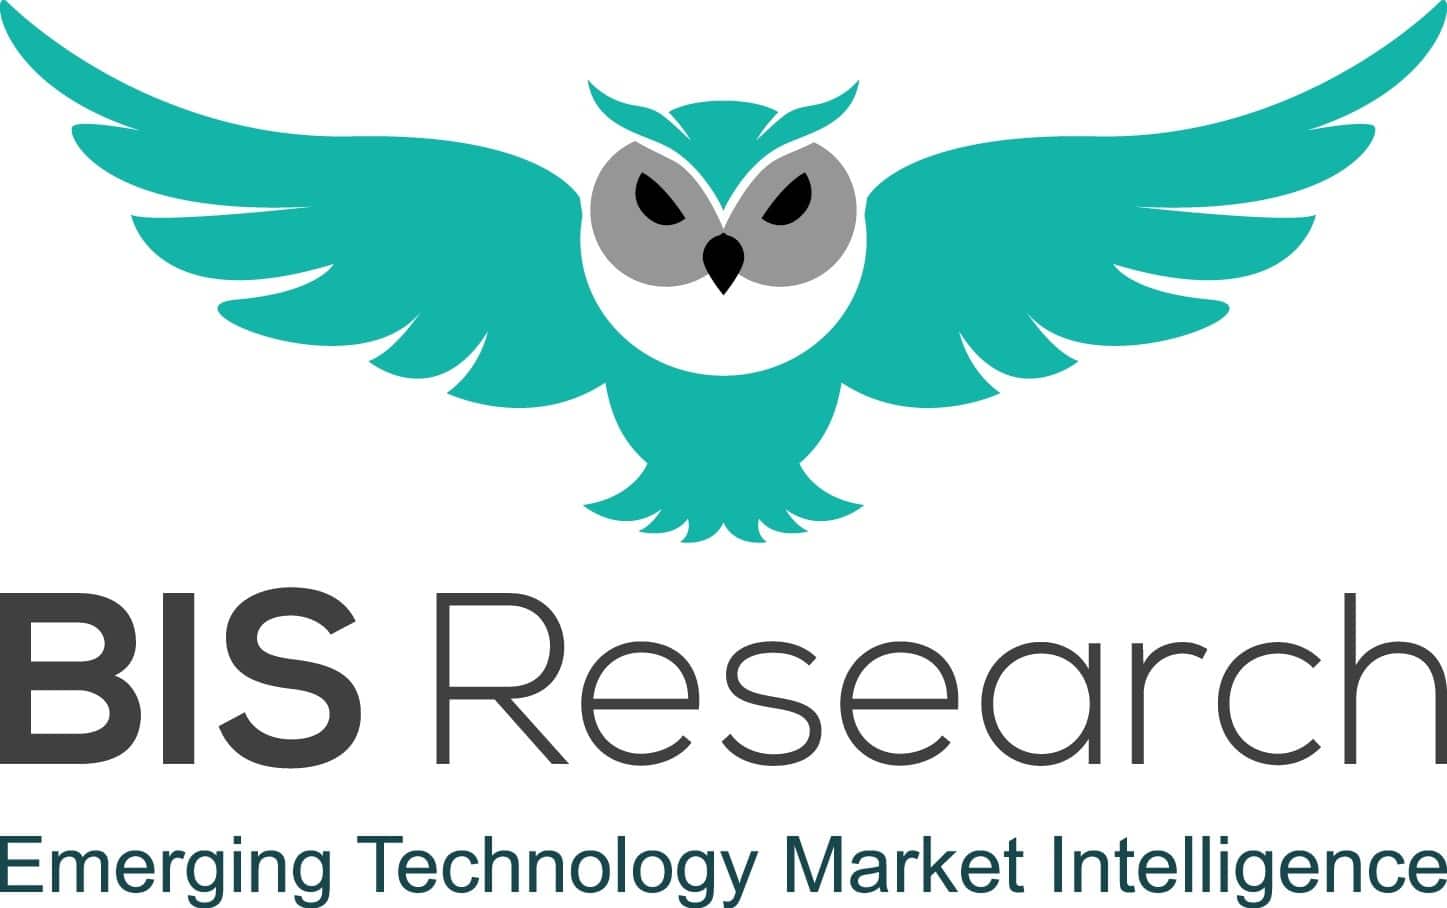 Urology Care Devices and Platforms Market